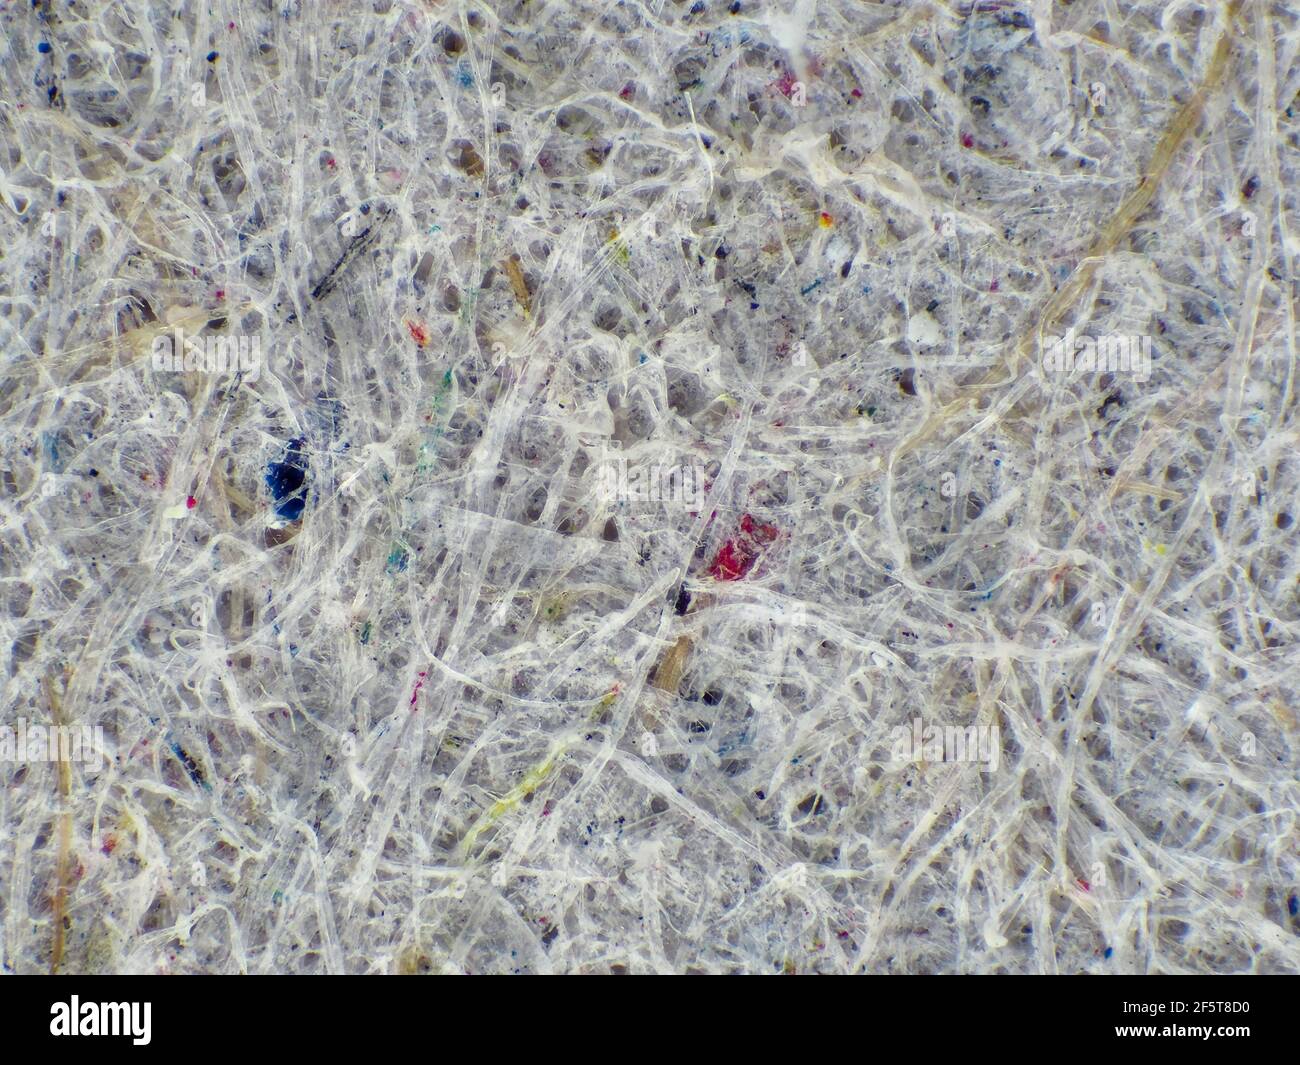 Cardboard egg carton under the microscope, horizontal filed of view is about 3mm Stock Photo